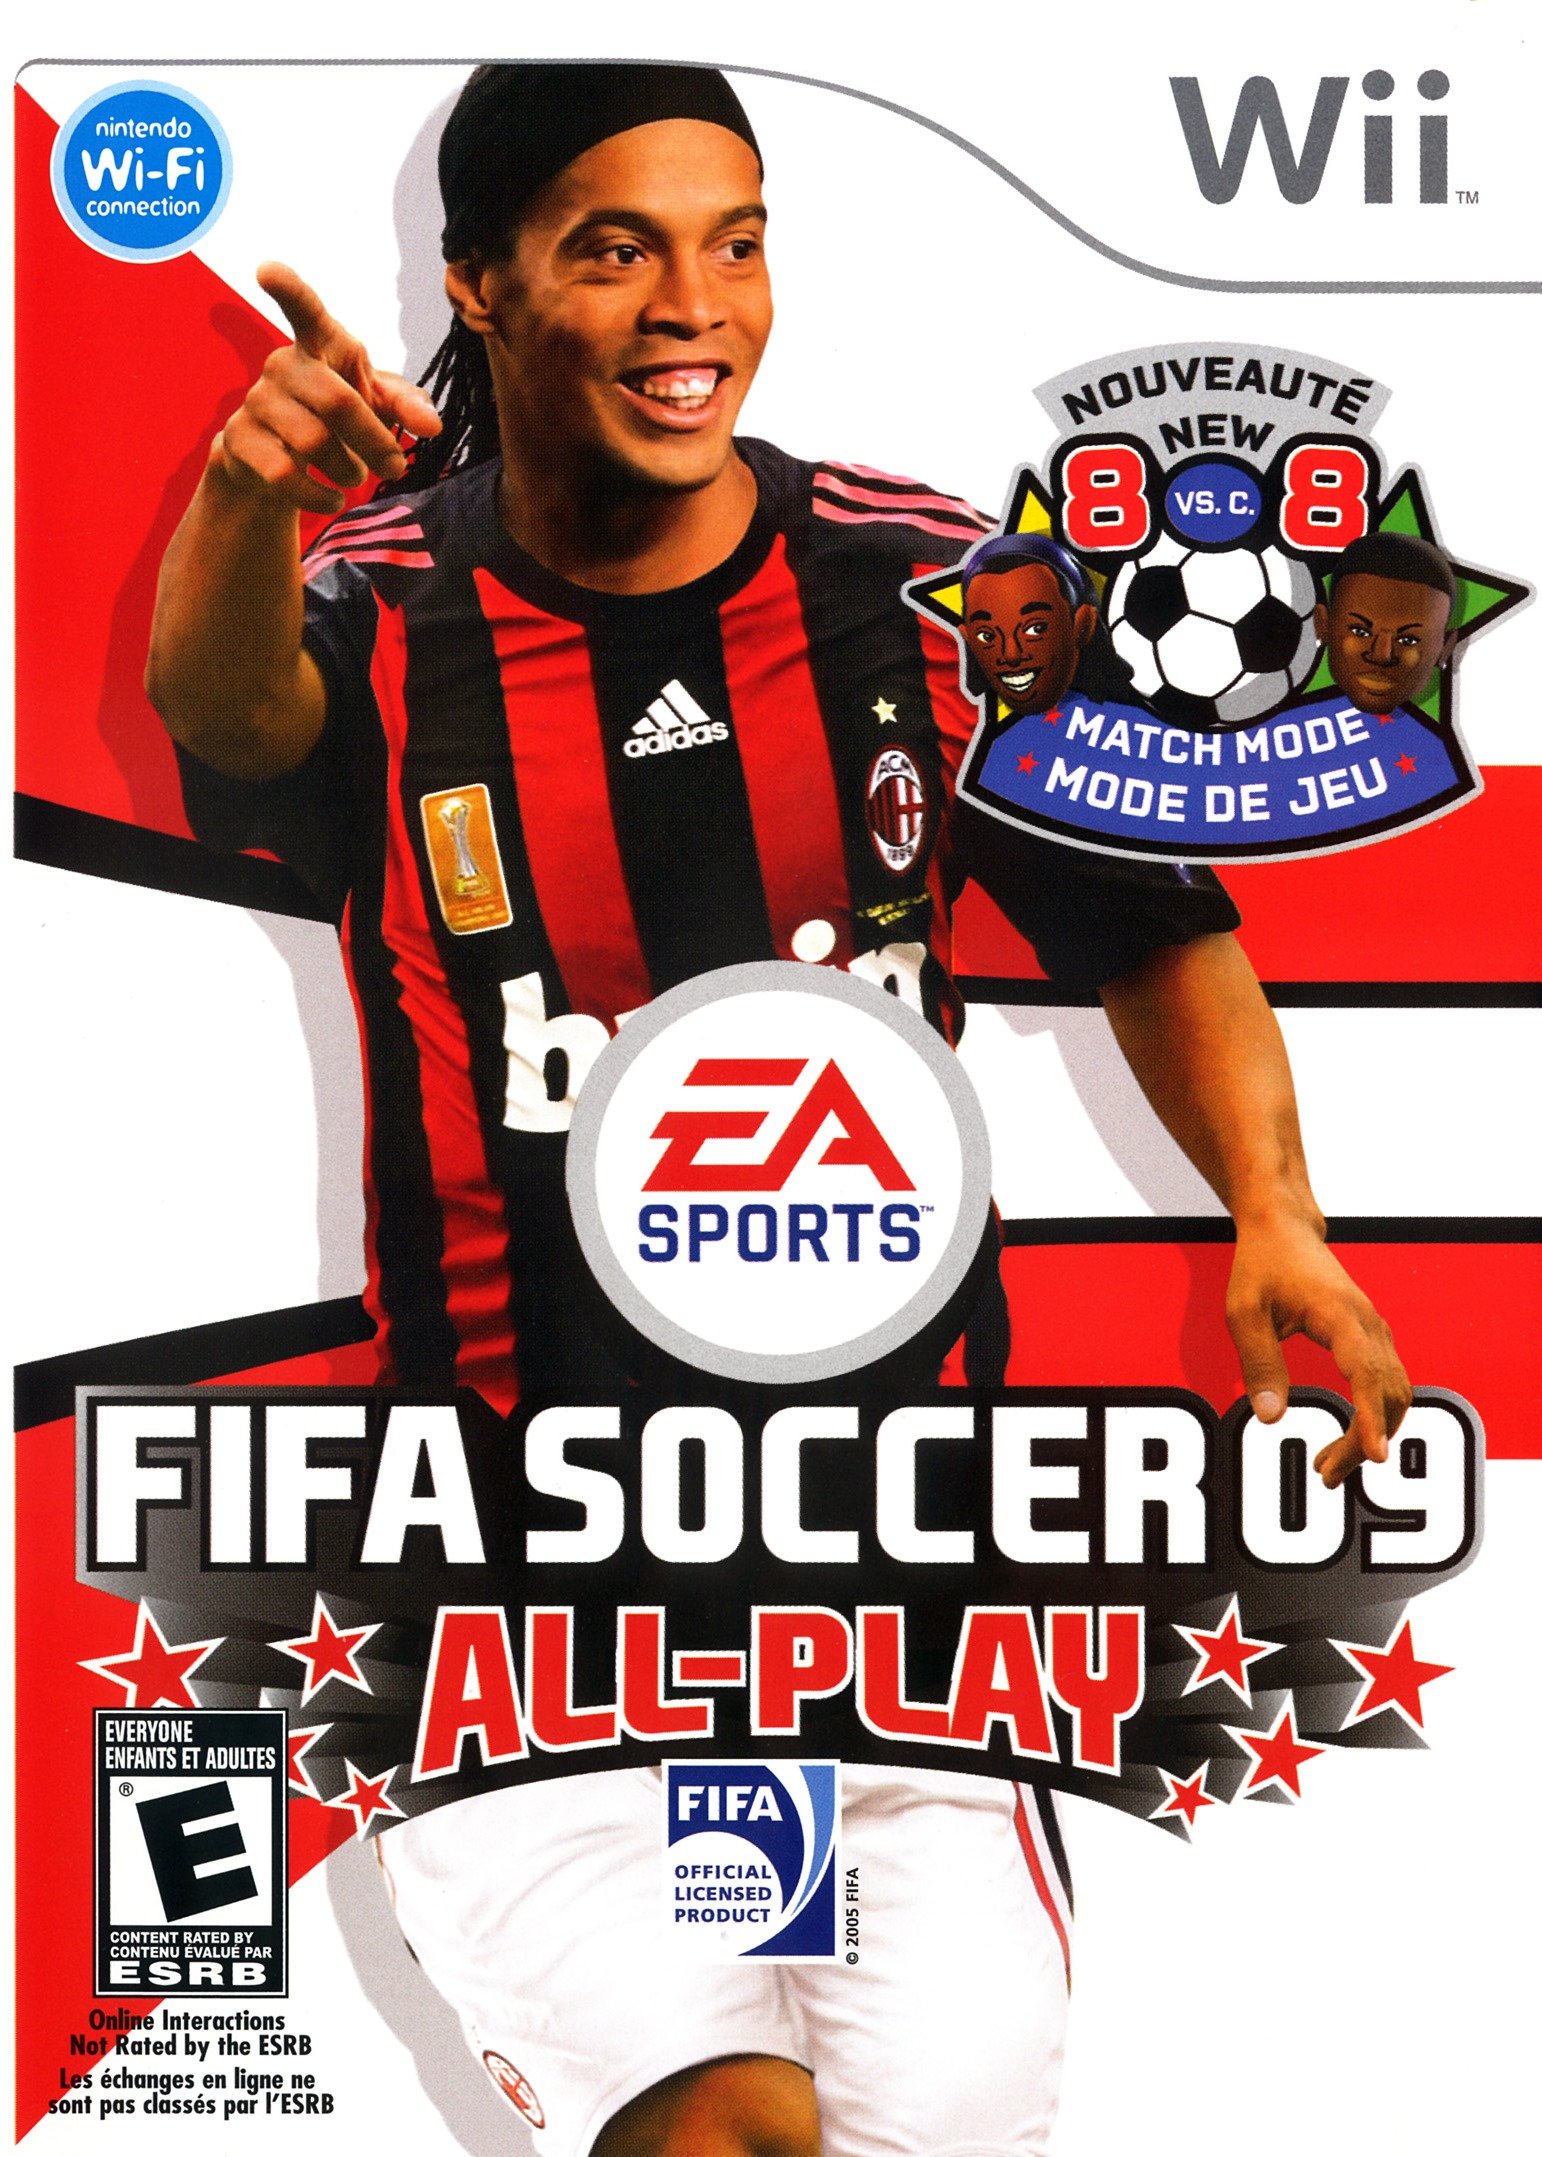 Image of FIFA Soccer 09 All-Play